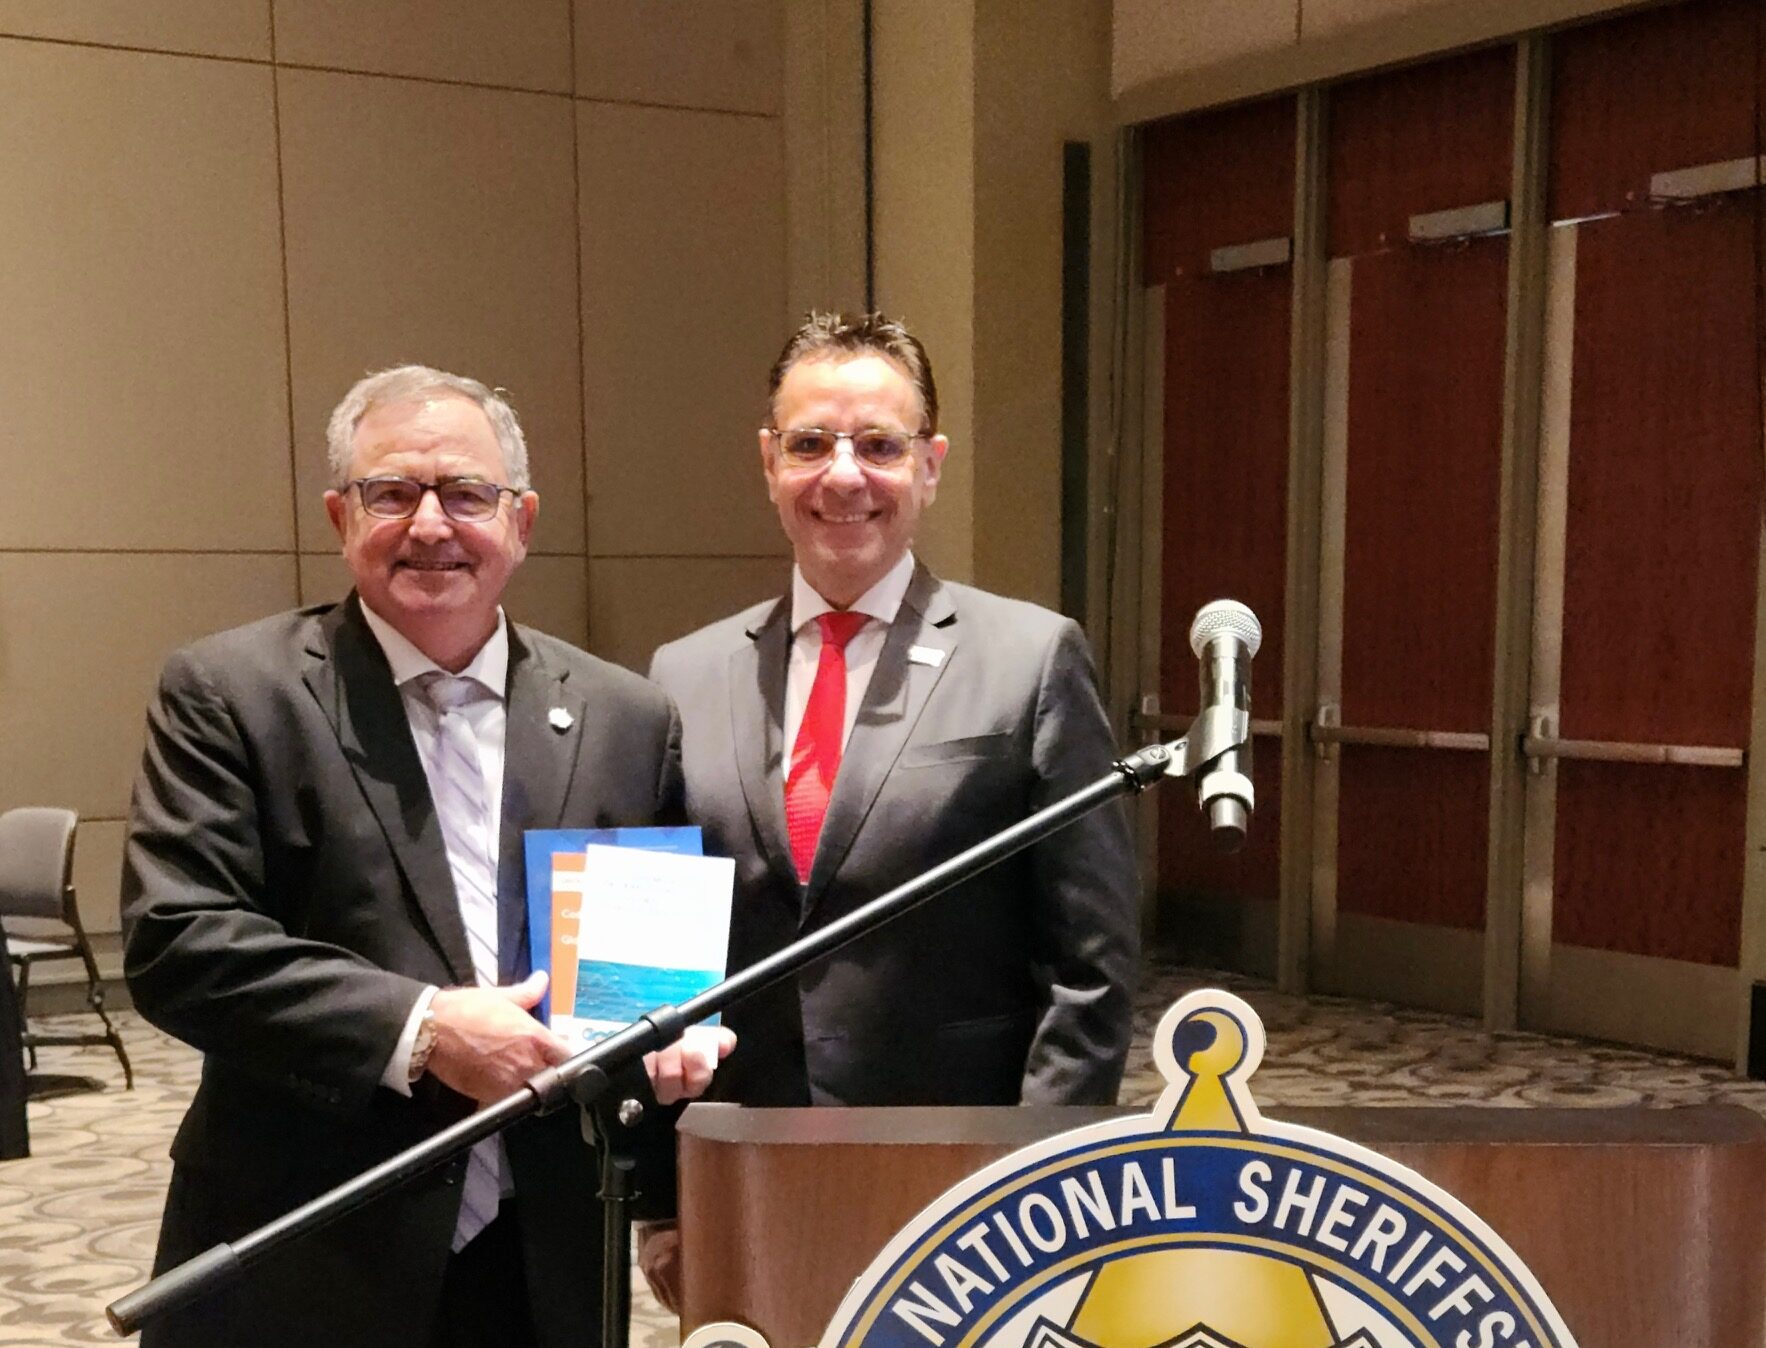 UIHJ attended the Annual Conference of the National Sheriff’s Association (NSA) in Grand Rapids, Michigan USA.